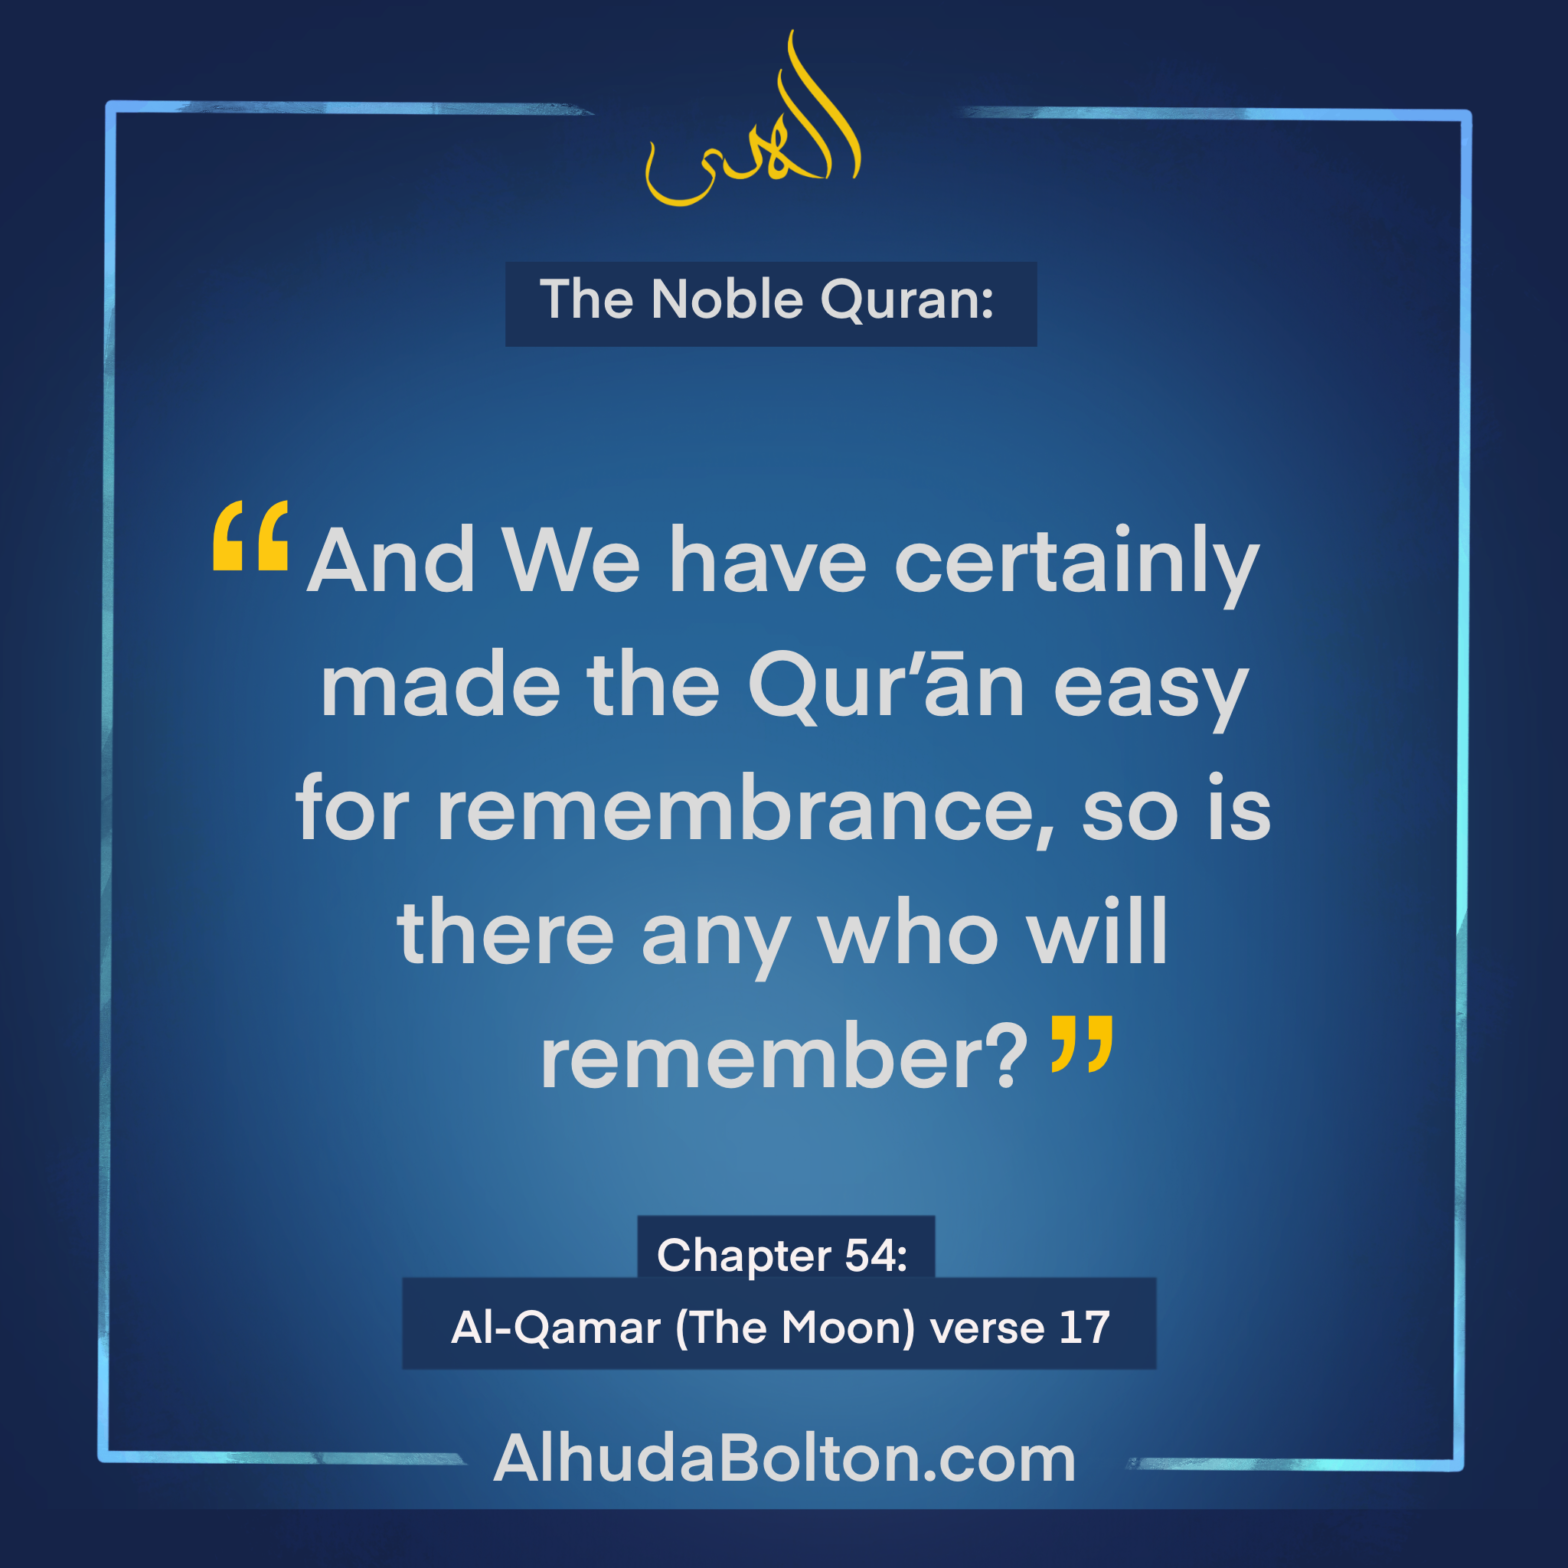 Quran: “is there any who will remember?” 